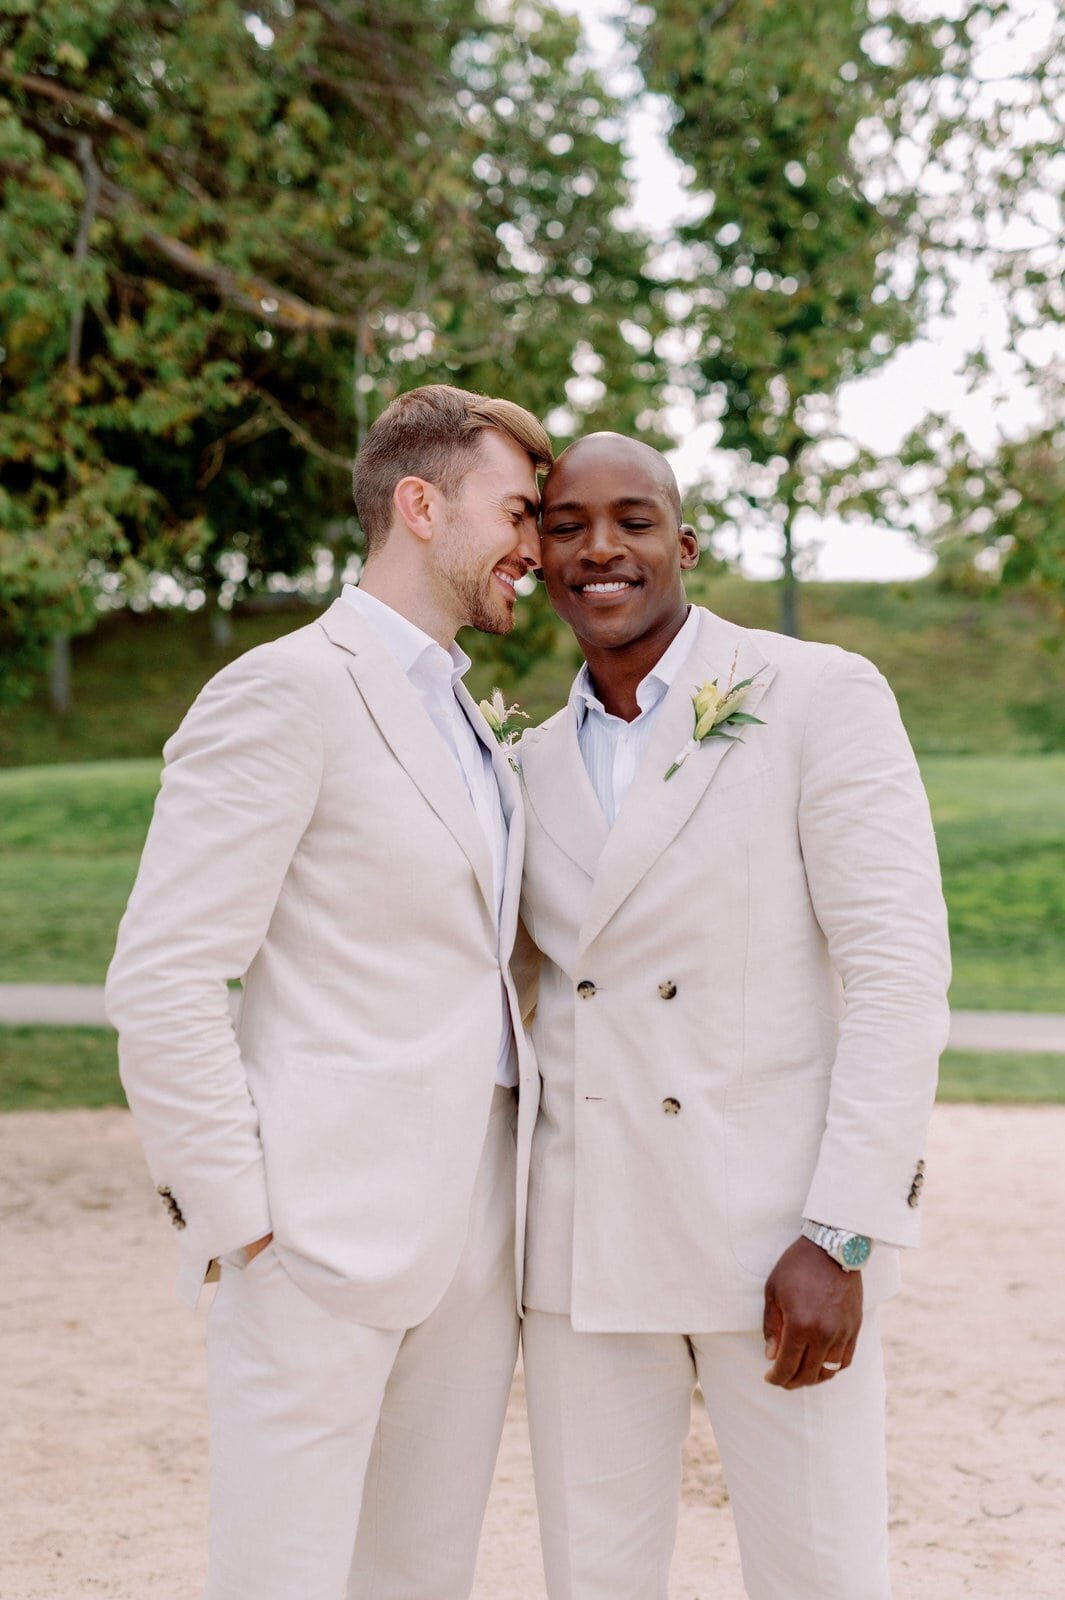 Interracial gay groom and groom wedding lgbtq happy in love at the beach muskoka lakes golf and country club jacqueline james photography